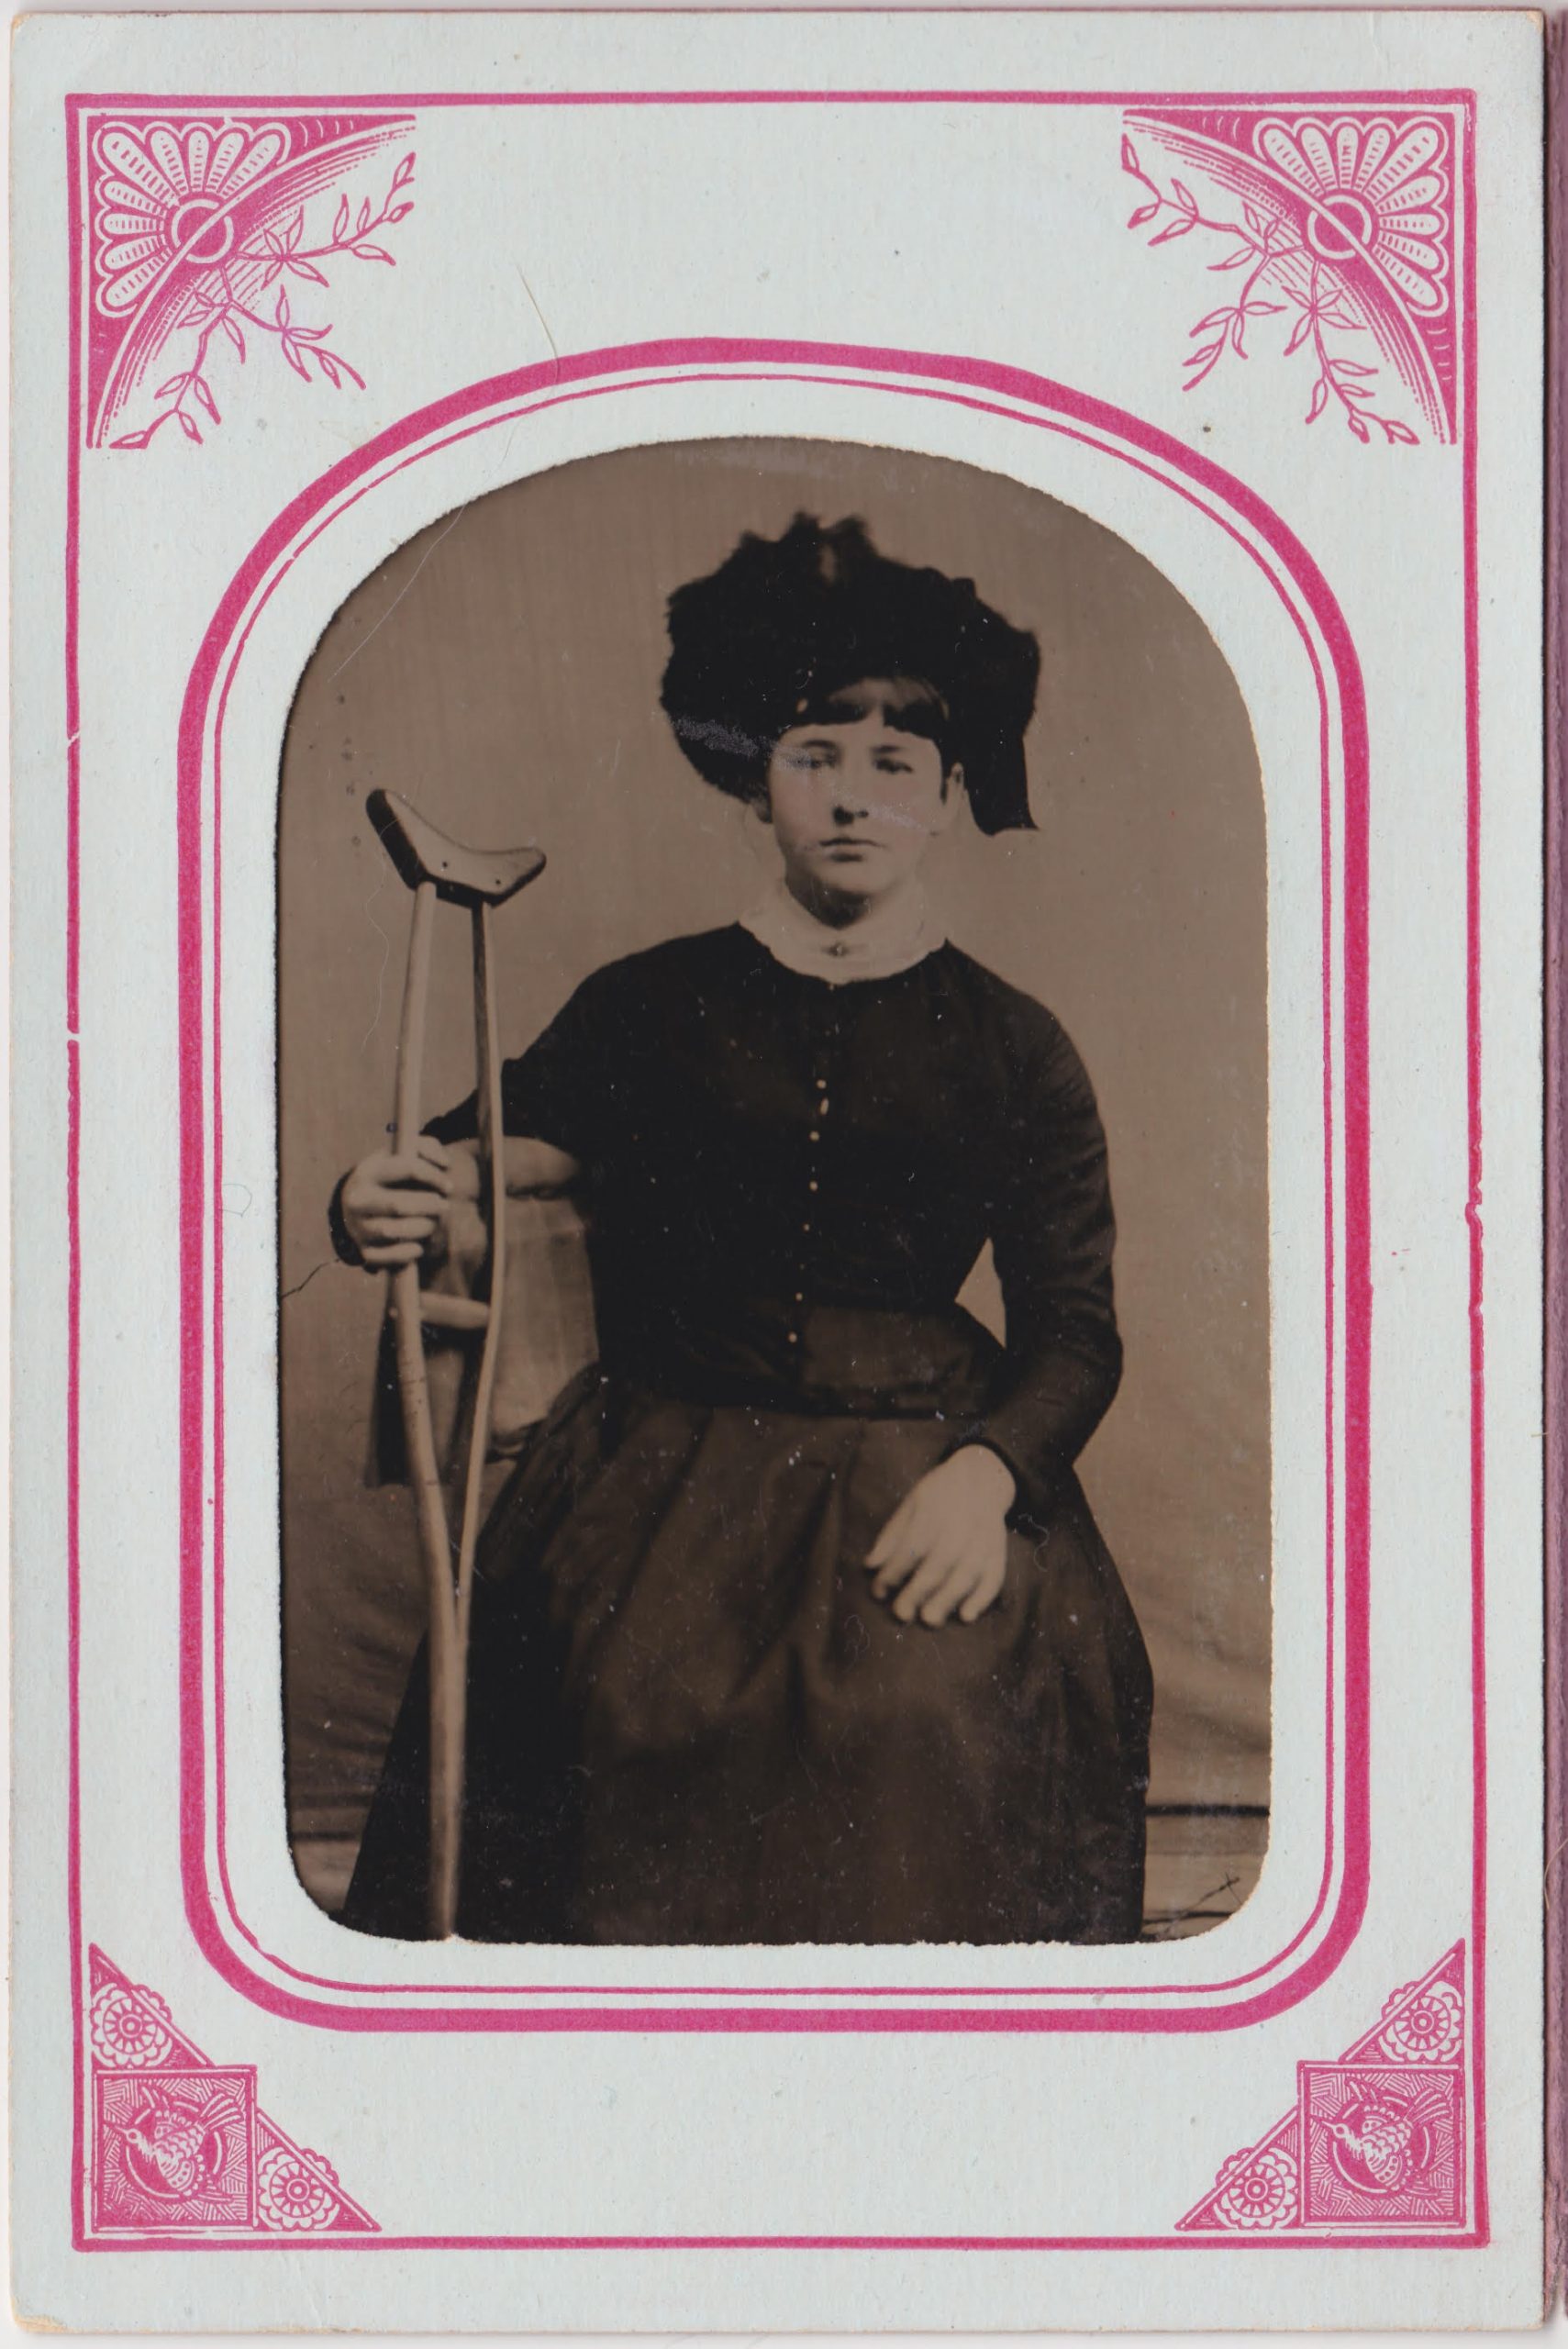 This is a black and white tintype of a woman sitting with a crutch in her right hand. Her left hand is resting on her knee. She is wearing a hat and gown with buttons (colored gold) down the bodice. The tintype is framed with white and red paper border. The border features stylized floral and bird designs in the corners.